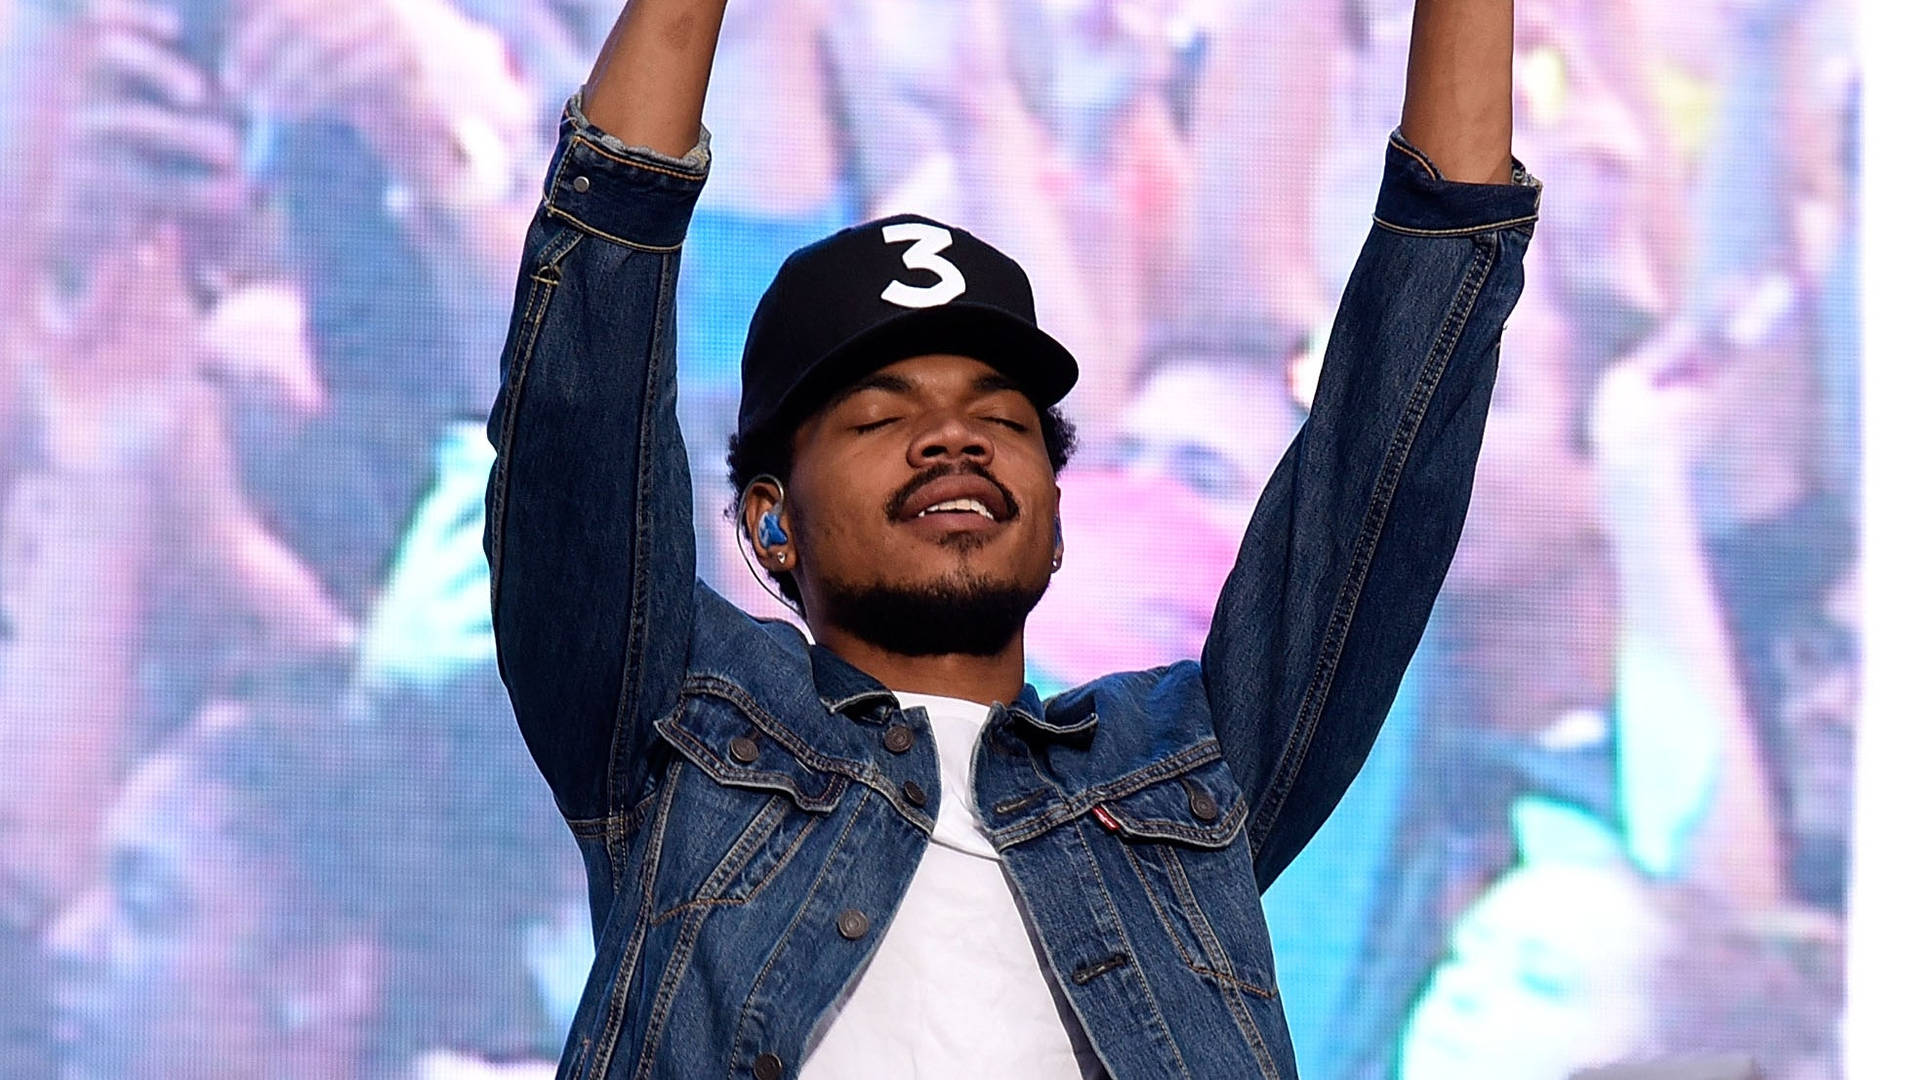 A man in denim jacket and hat raises his hands - Chance the Rapper